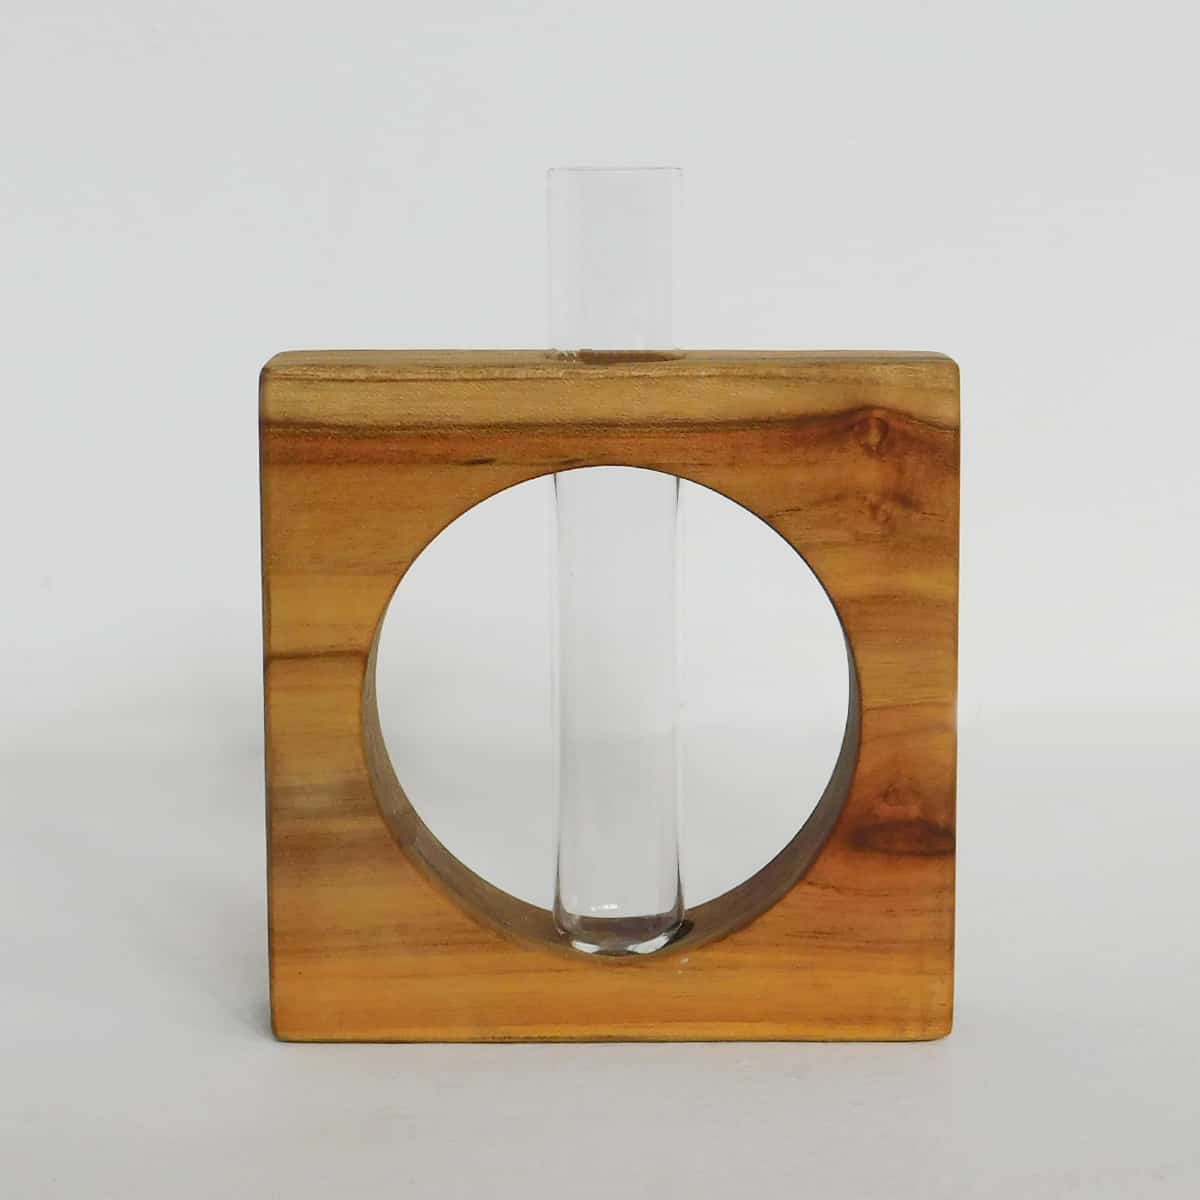 a square teak frame with a circle cut out and space for a tube vase